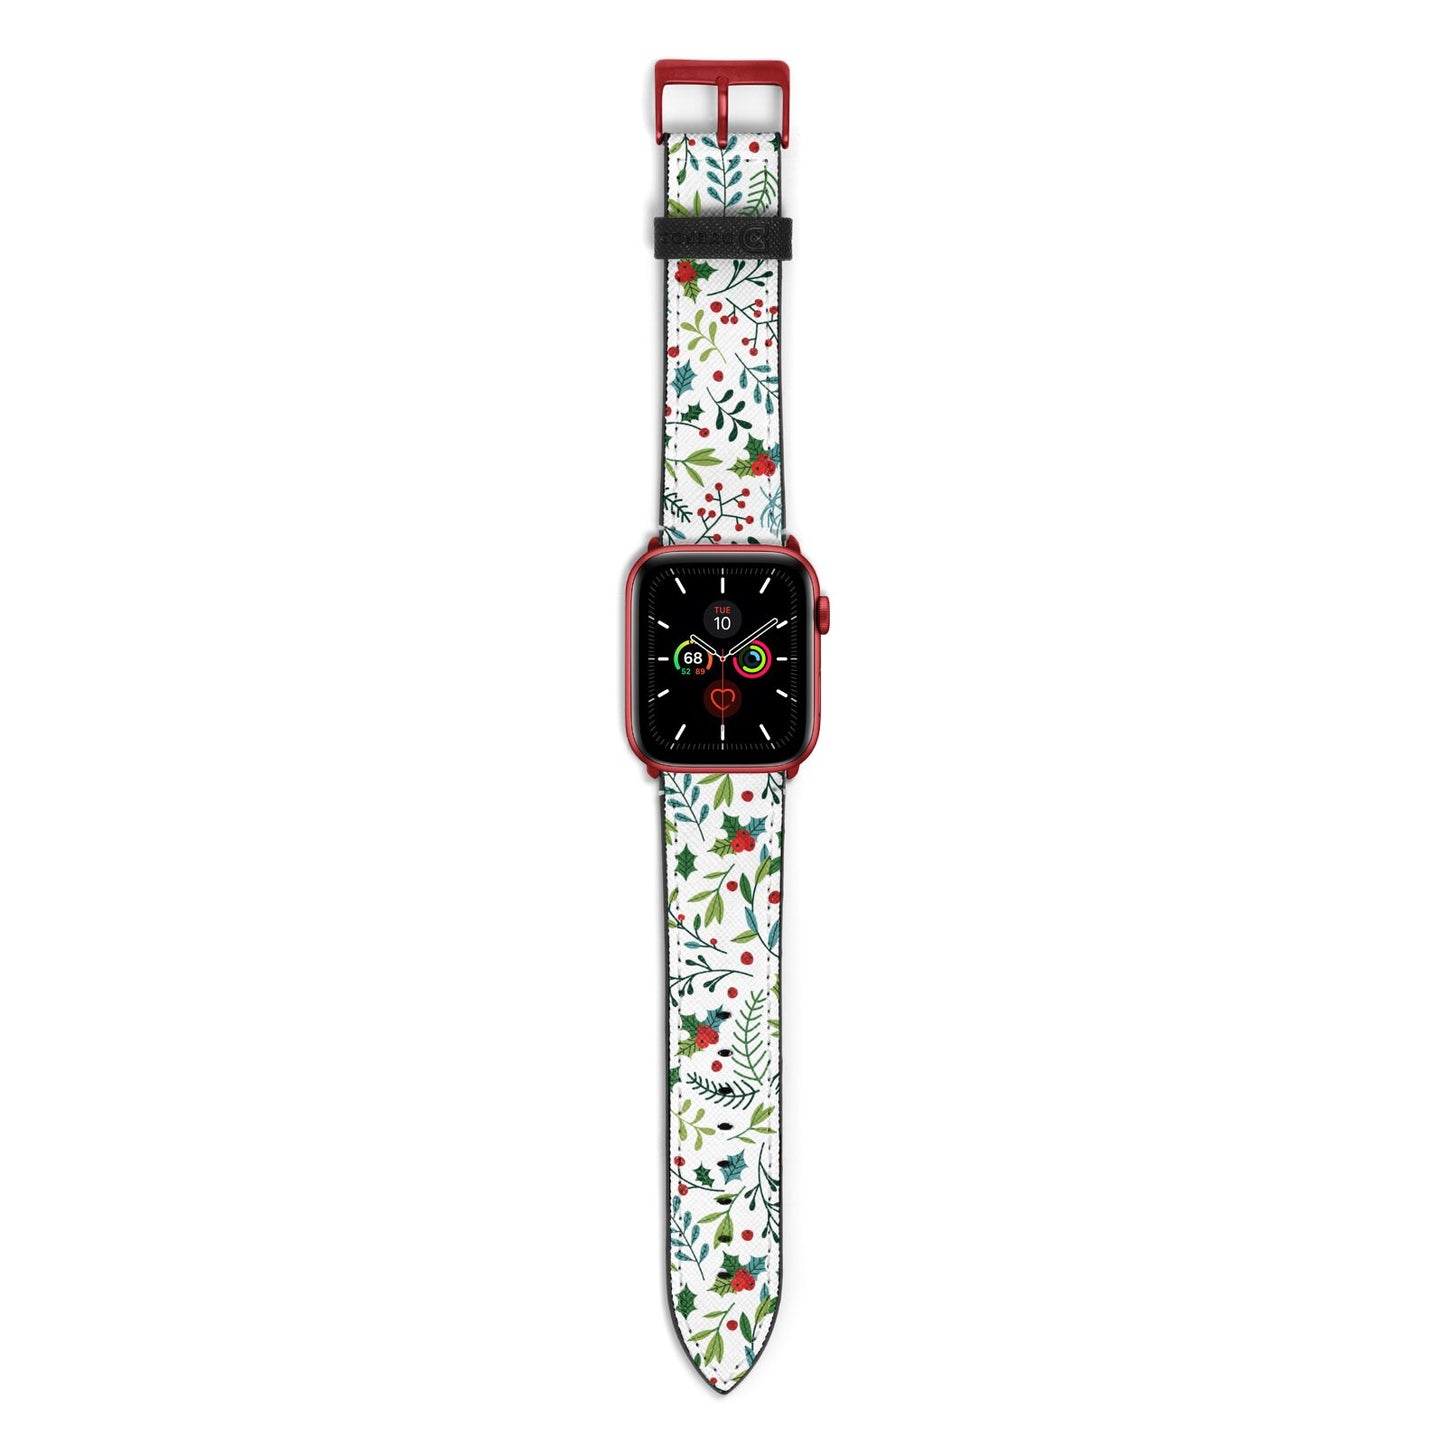 Winter Floral Apple Watch Strap with Red Hardware